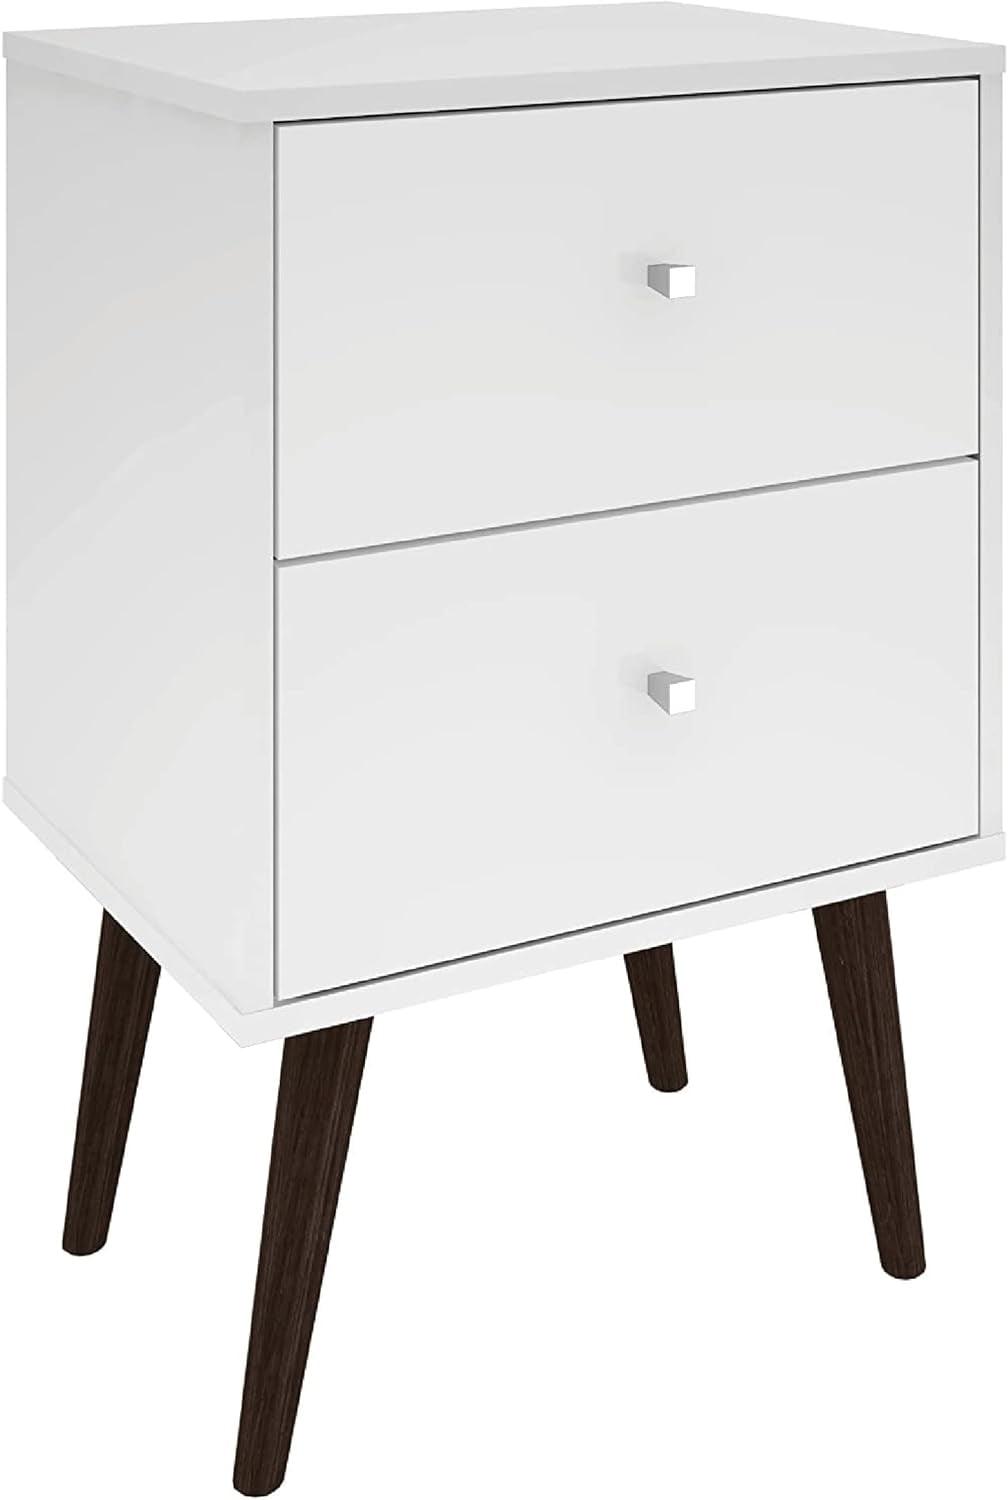 Liberty Solid Wood White & Rustic Brown Mid-Century Modern 2-Drawer Nightstand